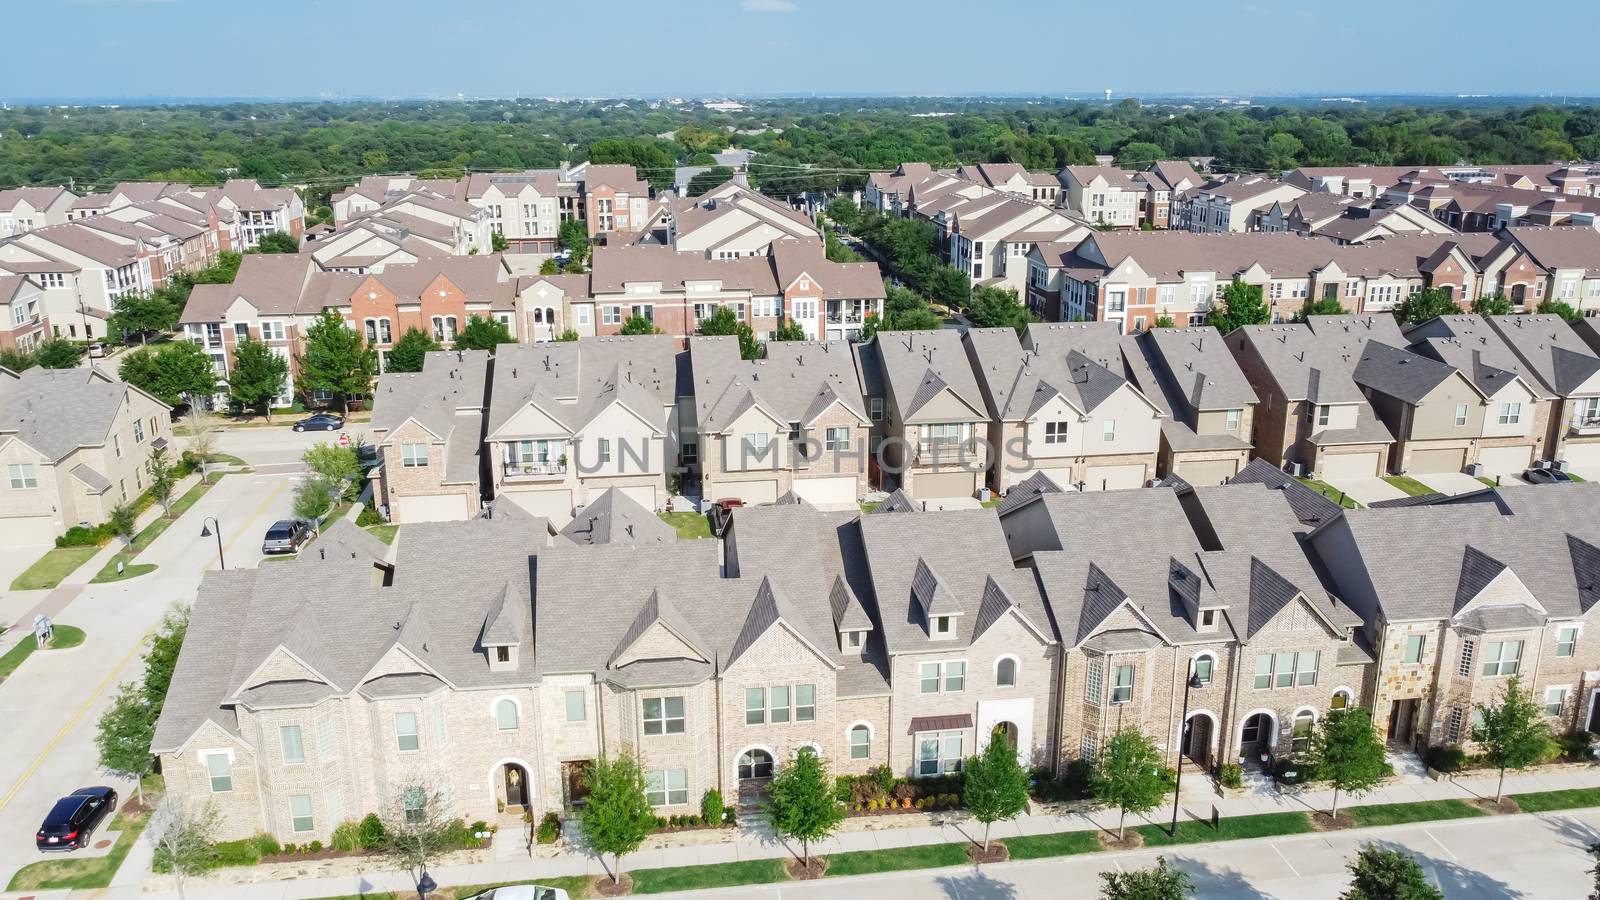 Aerial view of brand new two story condo and townhomes in downtown Flower Mound, Texas, America. Master-planned community and census-designated residential houses and apartment buildings